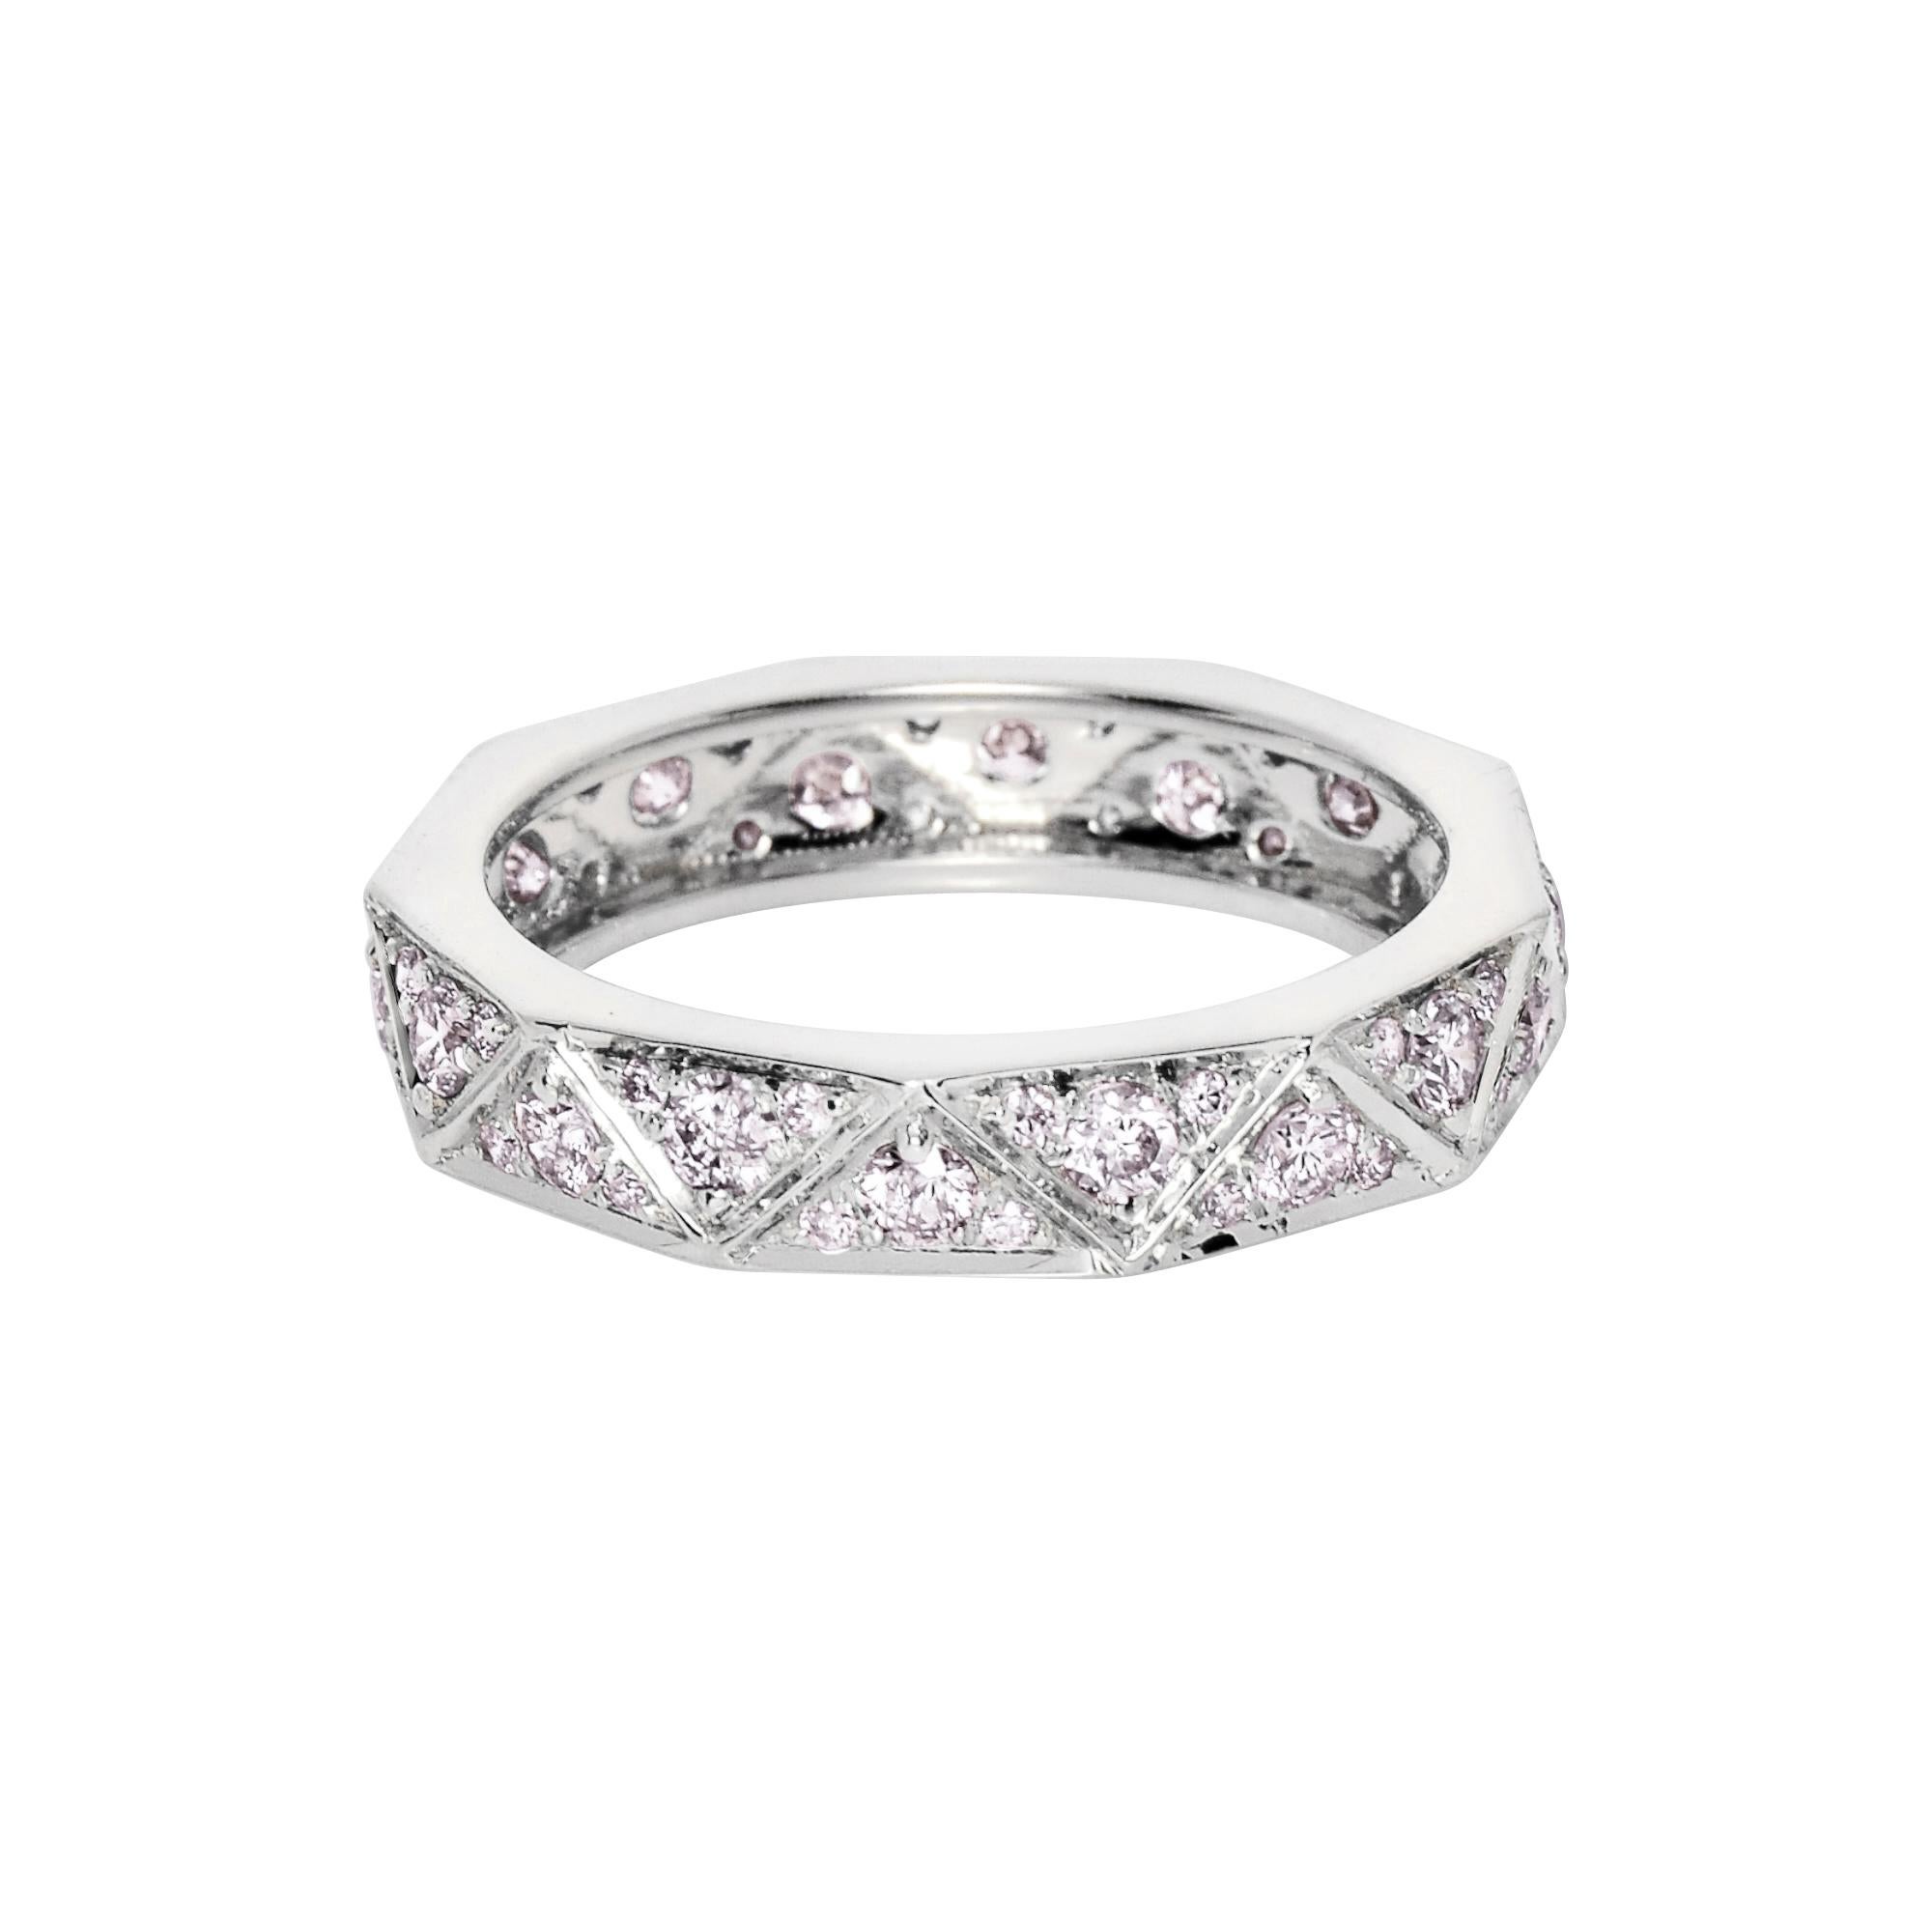 *IGI 14K 0.91 ct Natural Pink Diamonds Art Deco Eternity Ring*

This band features a stunning art deco eternity design from 14K white gold. It is set with natural pink diamonds weighing 0.91 carats.

This ring features colorful natural diamonds and